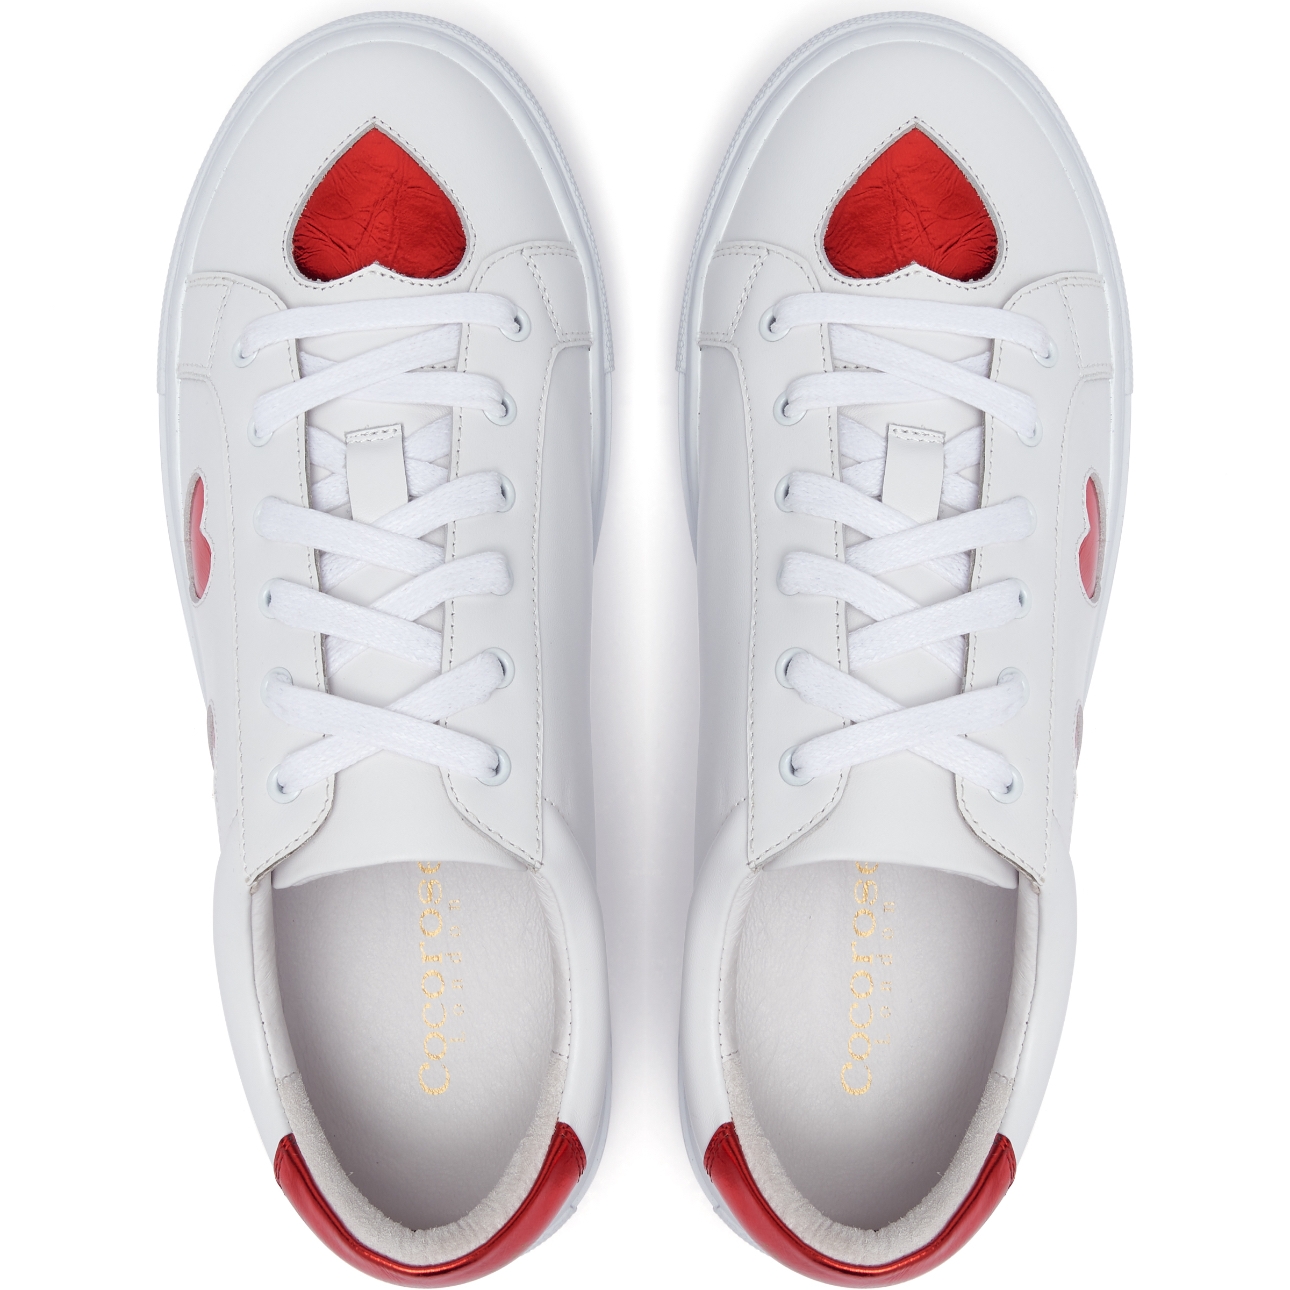 Hoxton Red Heart trainers by Cocorose London